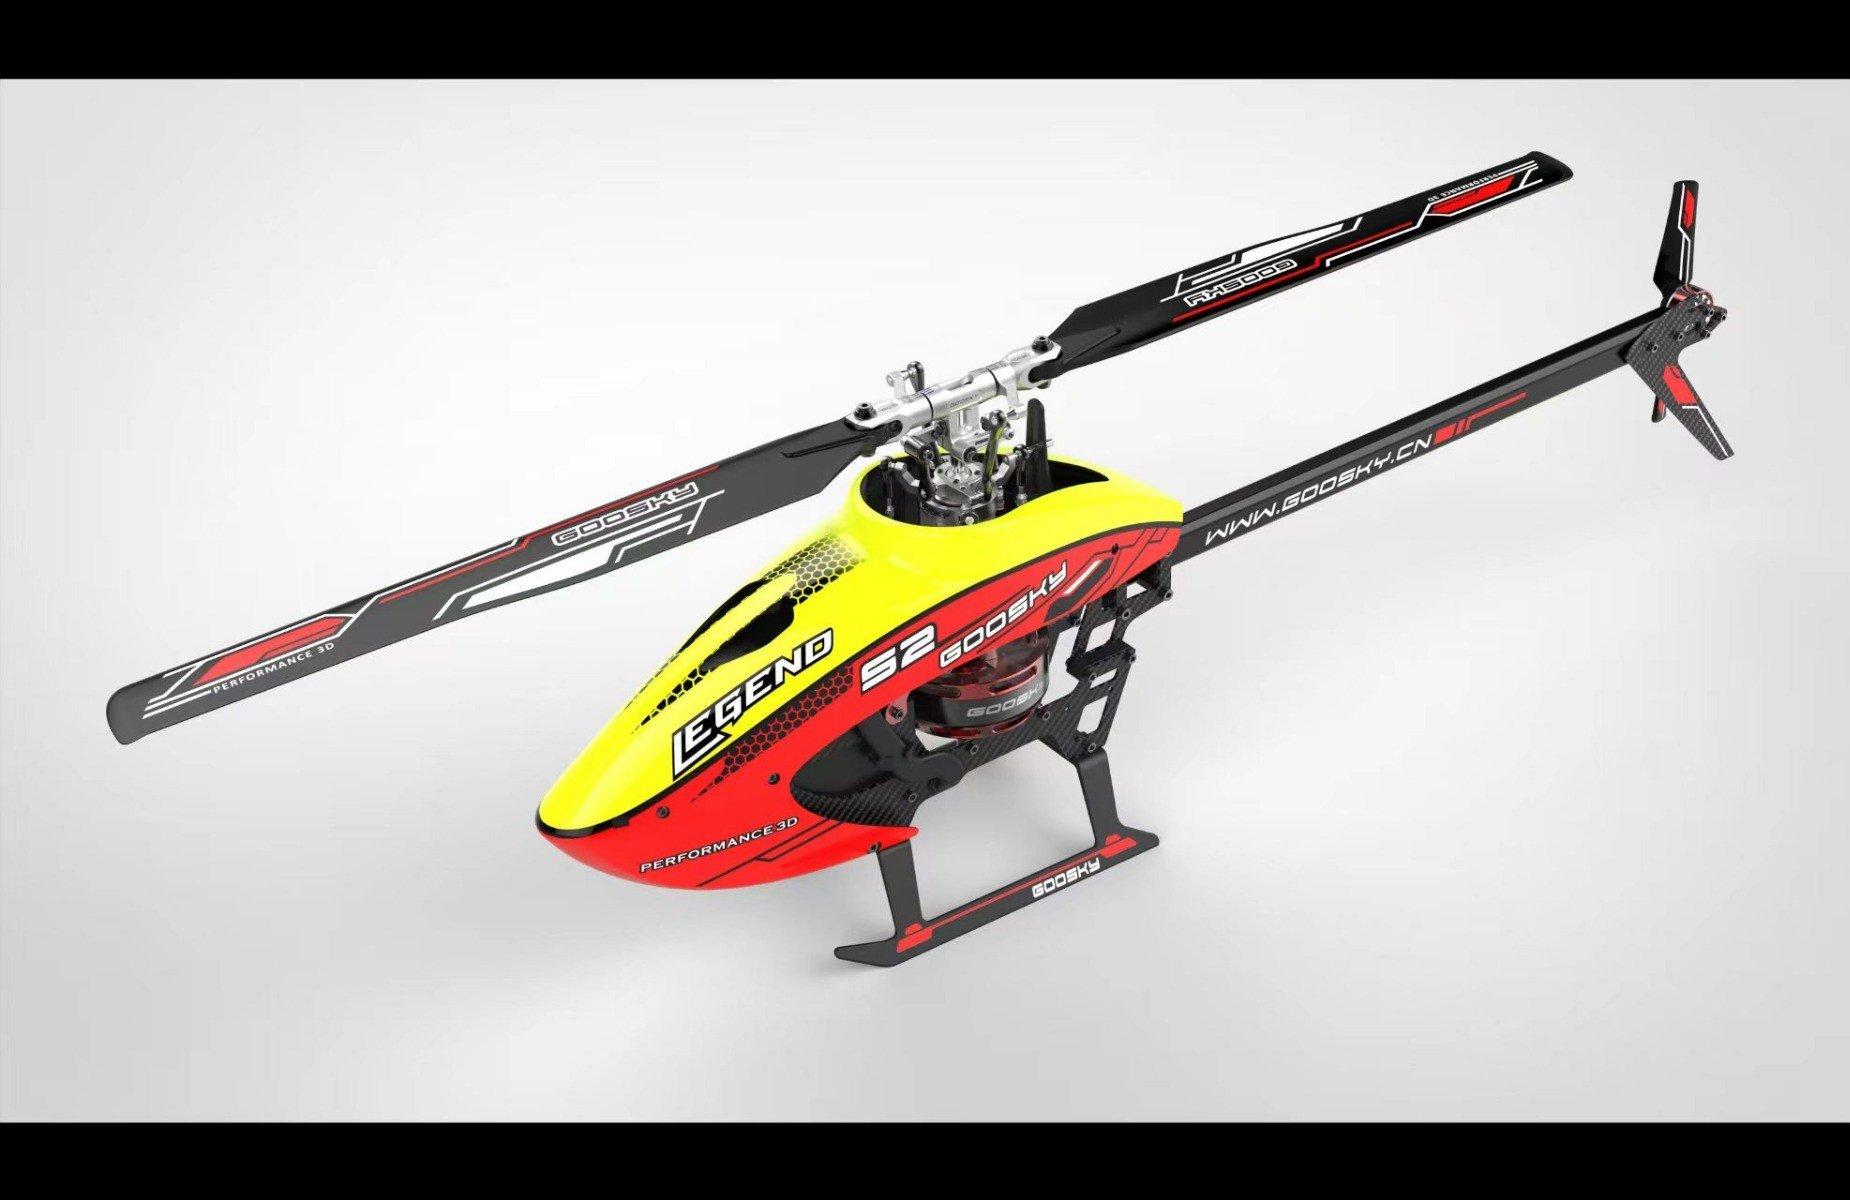 450 Rc Helicopter: Versatile customization and smooth flights make the 450 RC Helicopter ideal for all pilots.